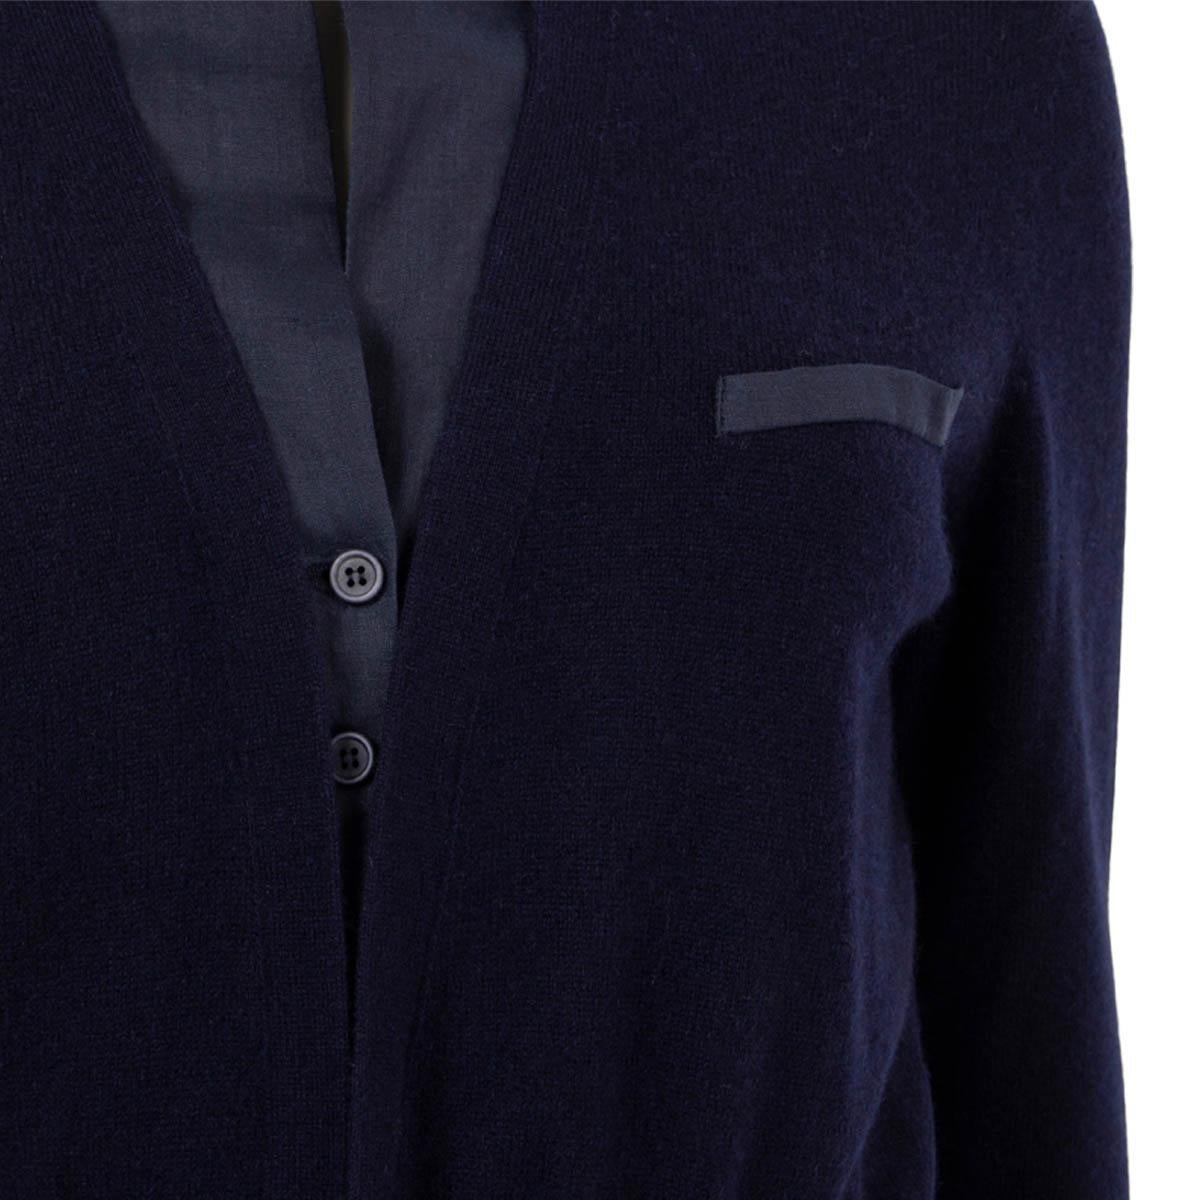 BRUNELLO CUCINELLI navy blue cashmere LAYERED LONG Cardigan Sweater L For Sale 1